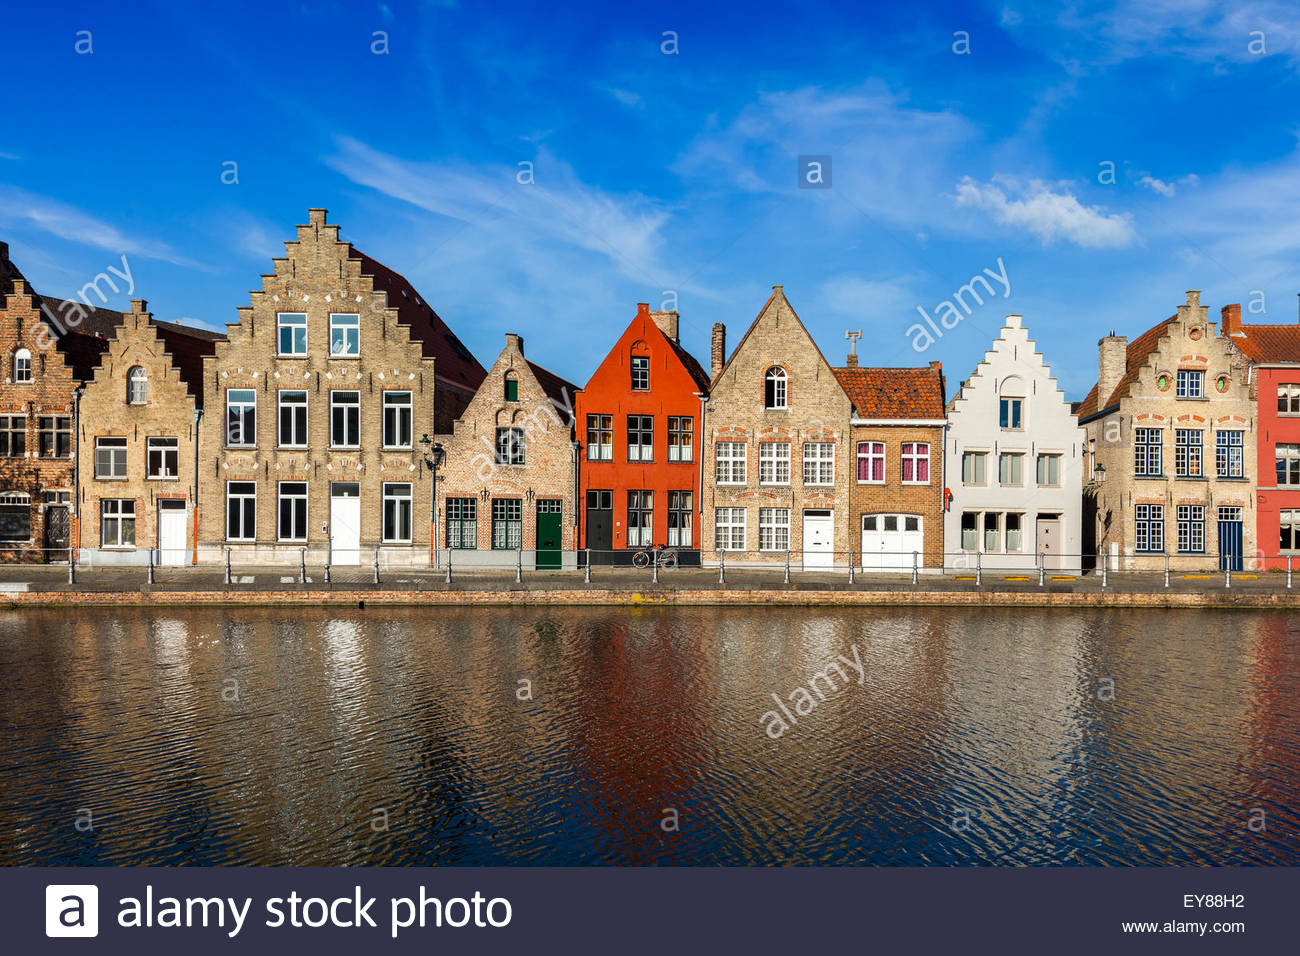 Typical European Wallpaper Europe Cityscape Canal And